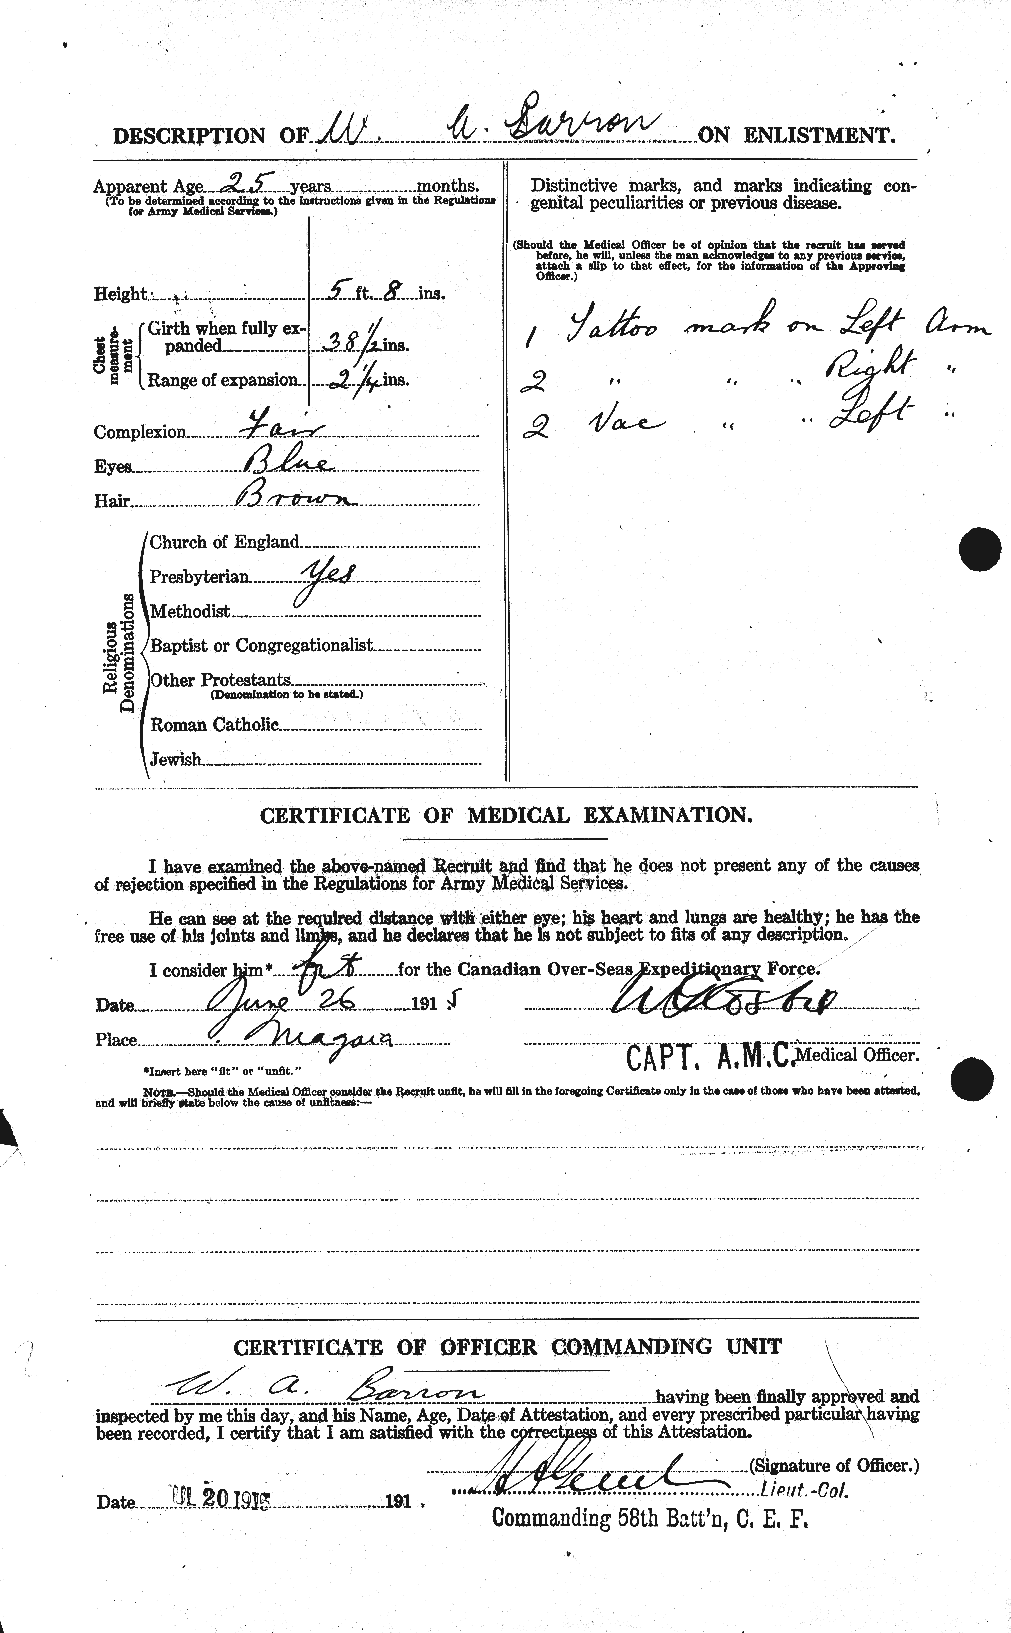 Personnel Records of the First World War - CEF 219881b